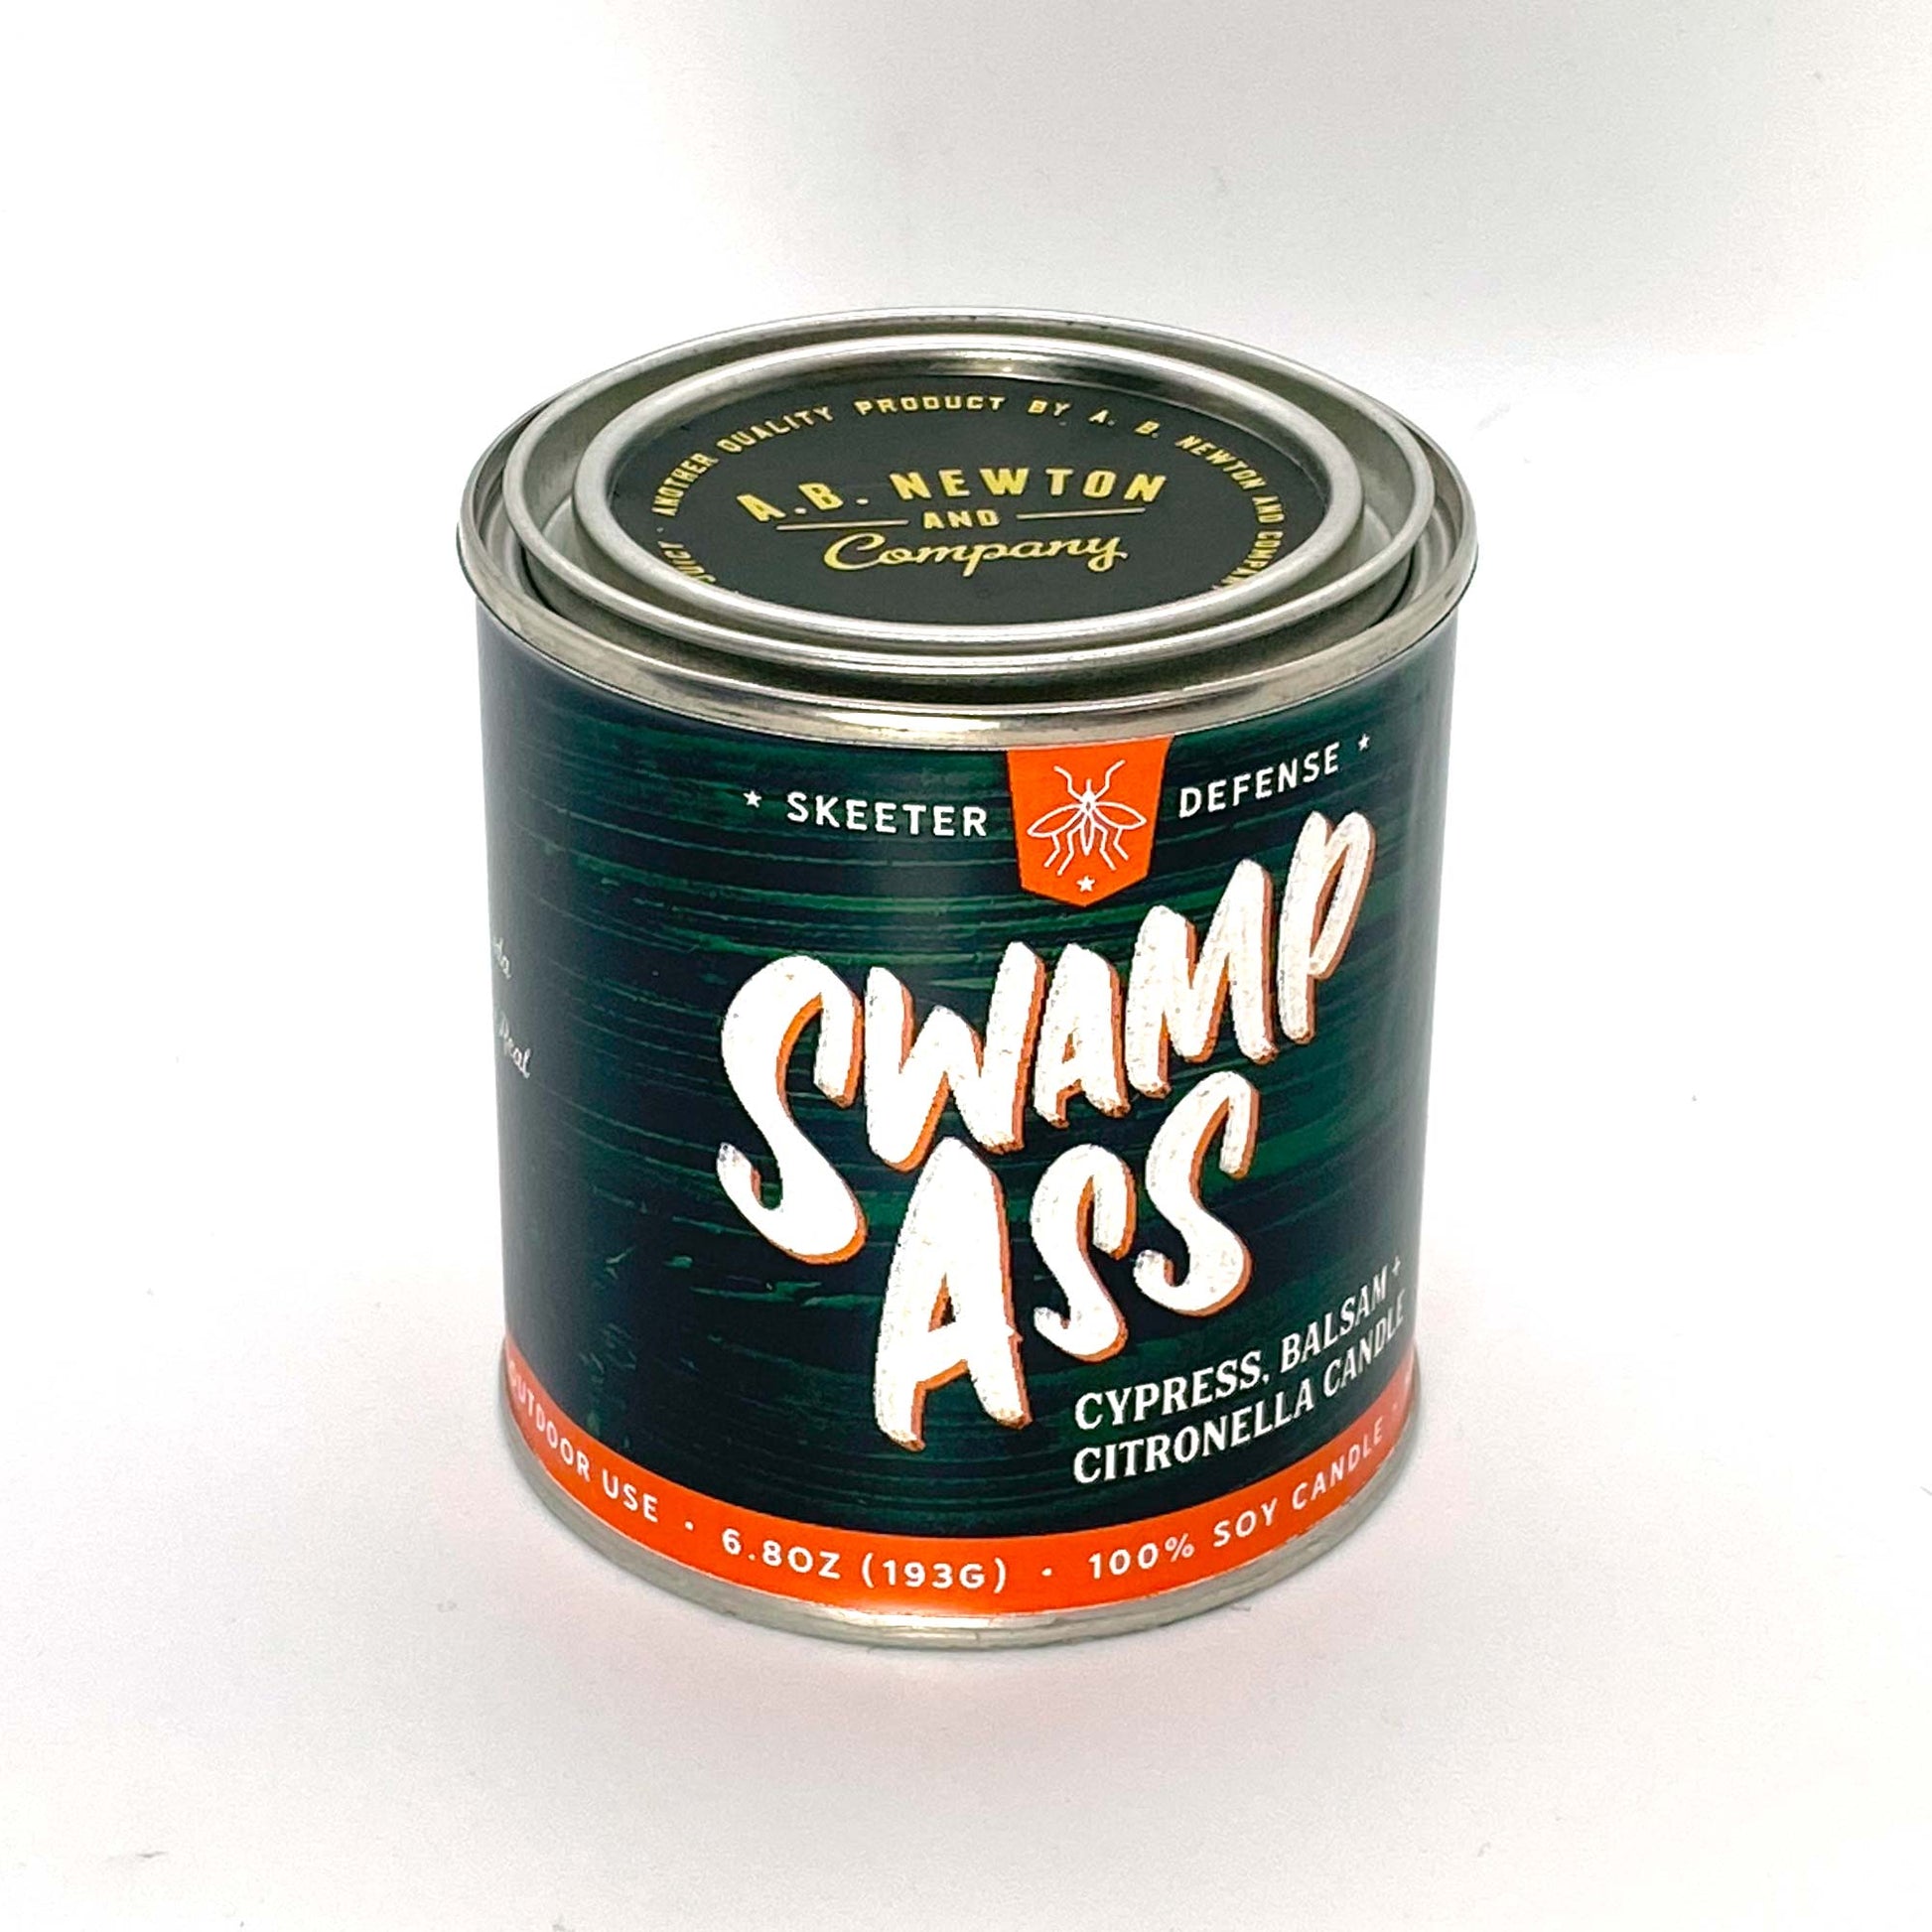 Swamp Ass Goods Outdoor Citronella Scented Soy Candle - A. B. Newton and Company